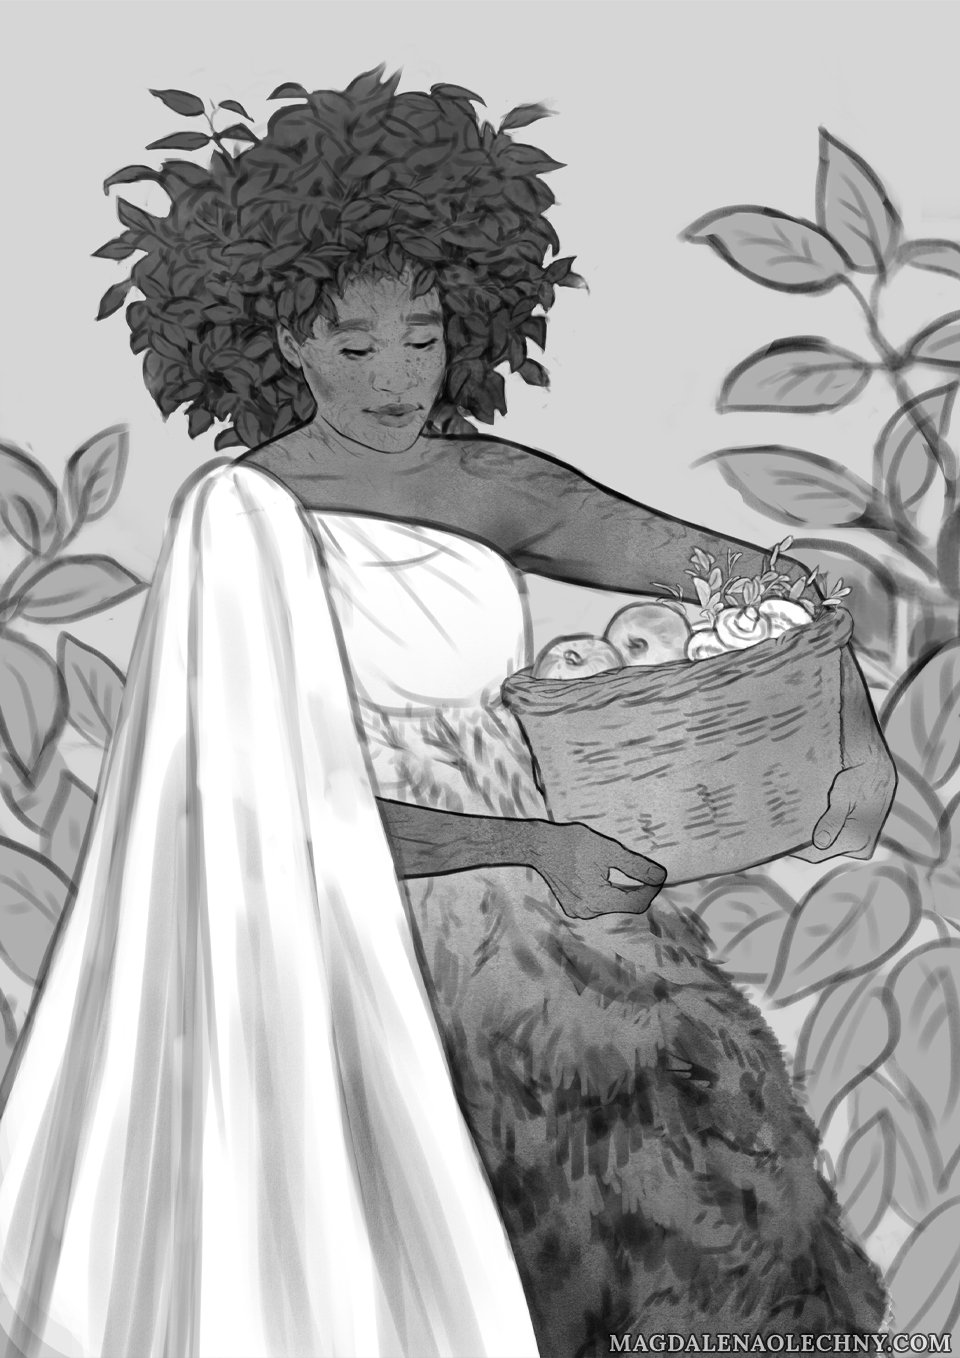 Digital sketch of Yavanna, a character from Silmarillion by J.R.R. Tolkien. She has leaf hair, a dress adorned with coniferous branches, and carries a basket full of fruit, vegetables and mushrooms.